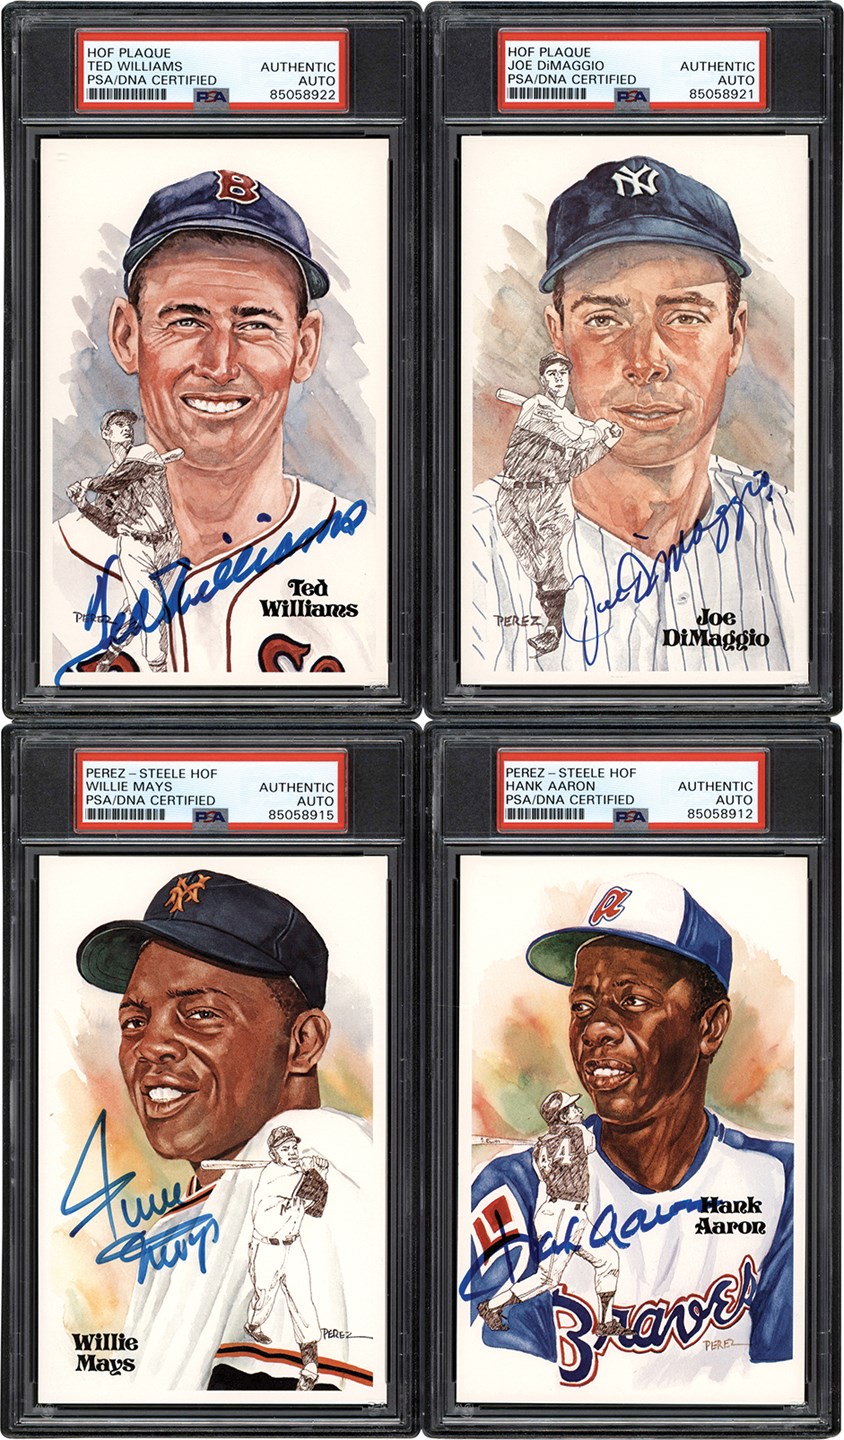 Baseball Autographs - Perez-Steele Signed Hall of Fame Postcard Collection (29)